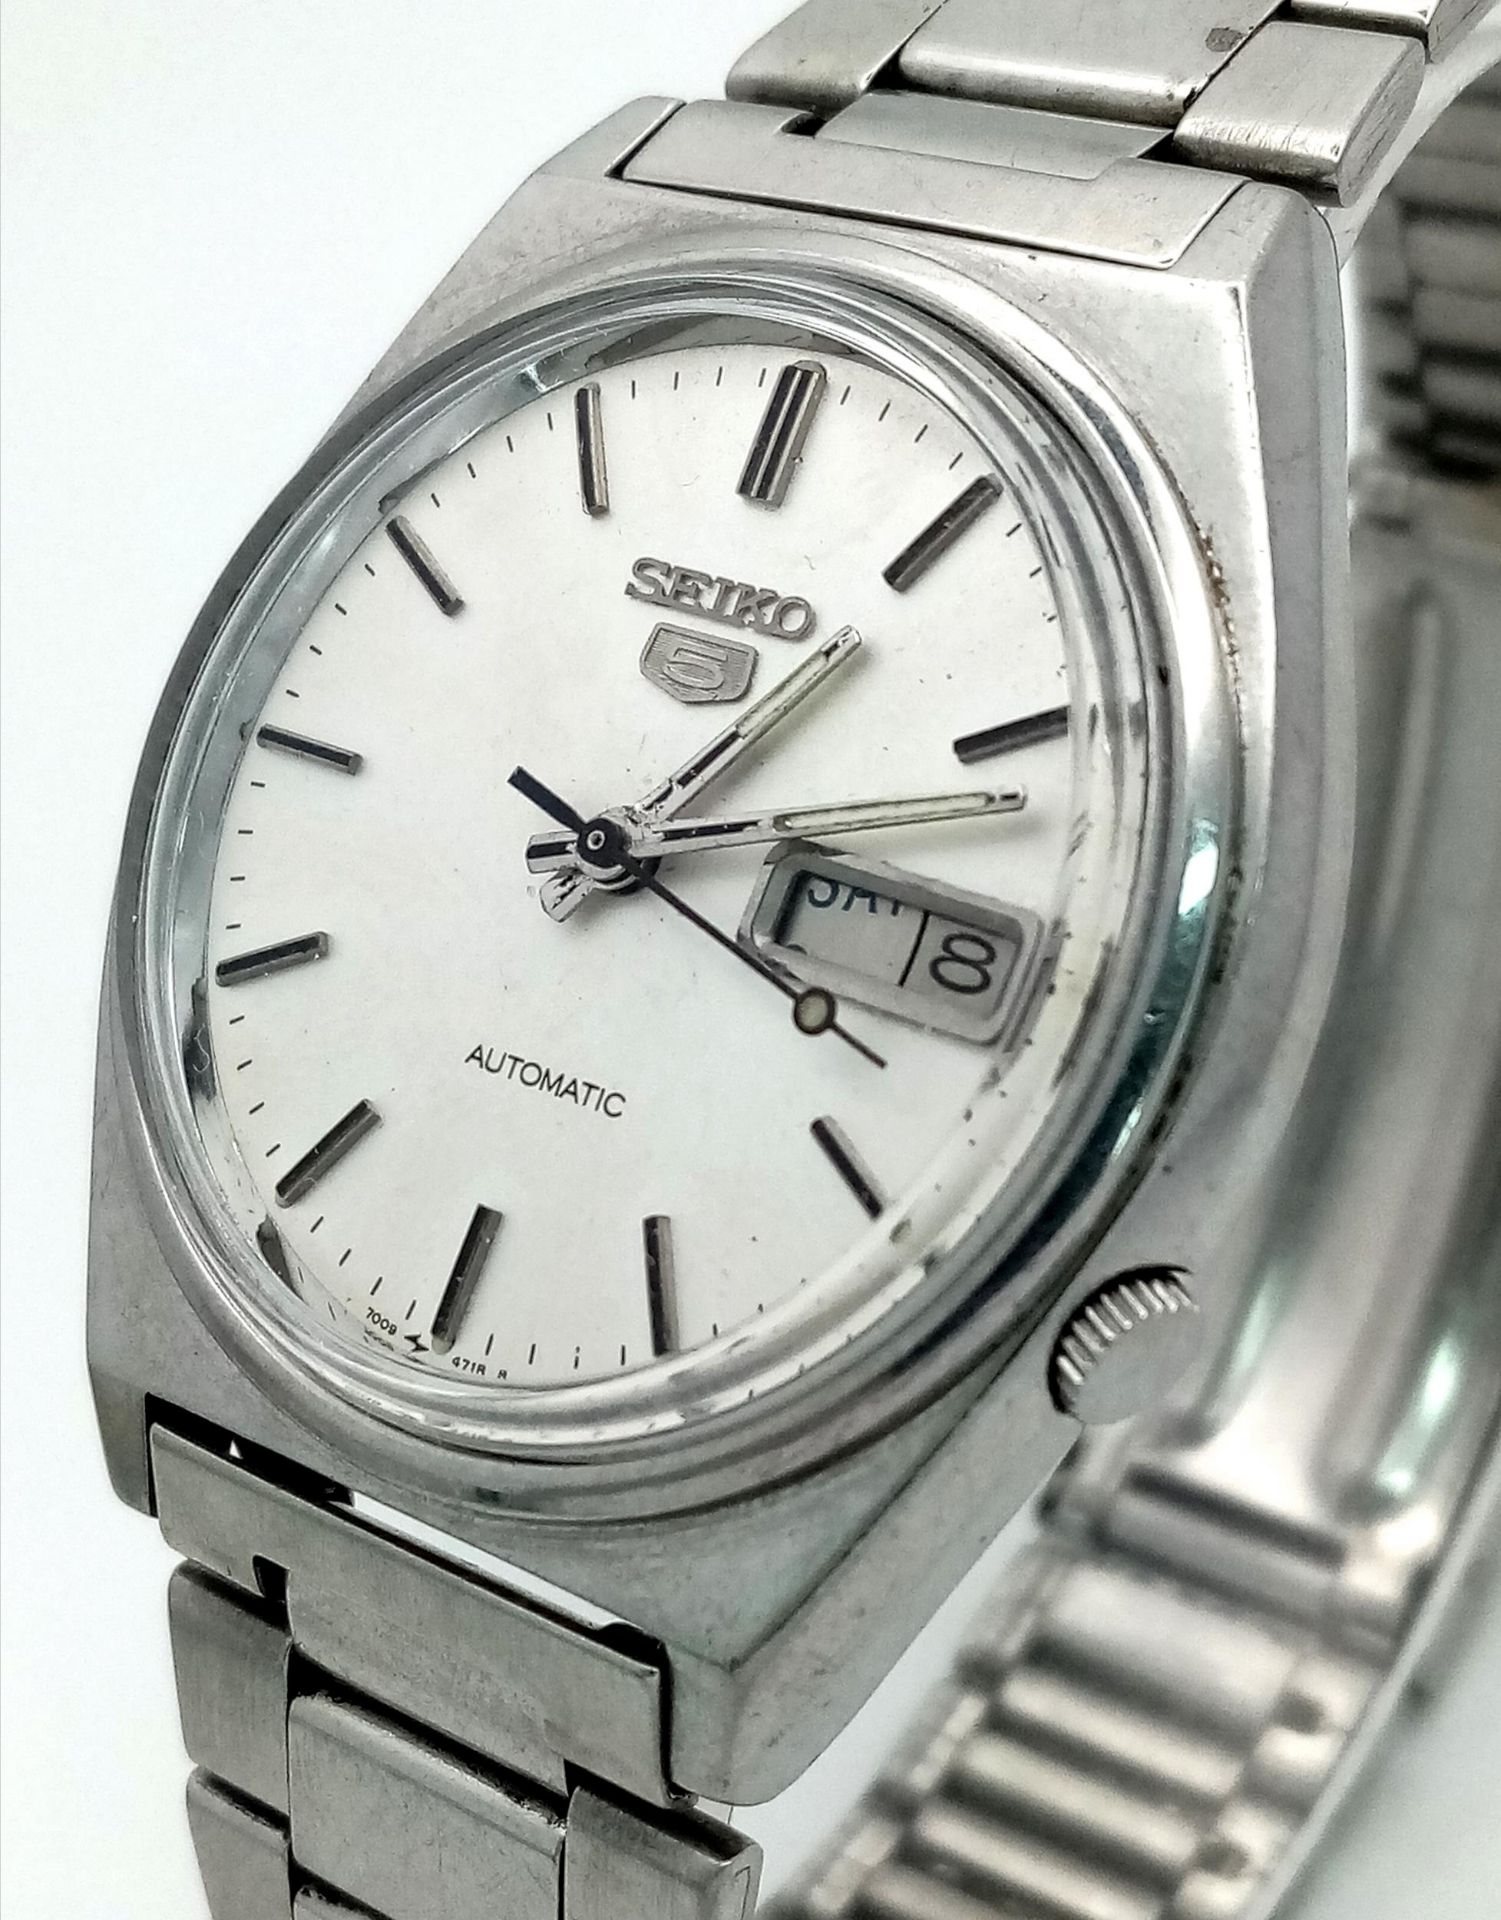 A Vintage Seiko 5 Automatic Gents Watch. Stainless steel bracelet and case - 37mm. Silver tone - Image 4 of 7